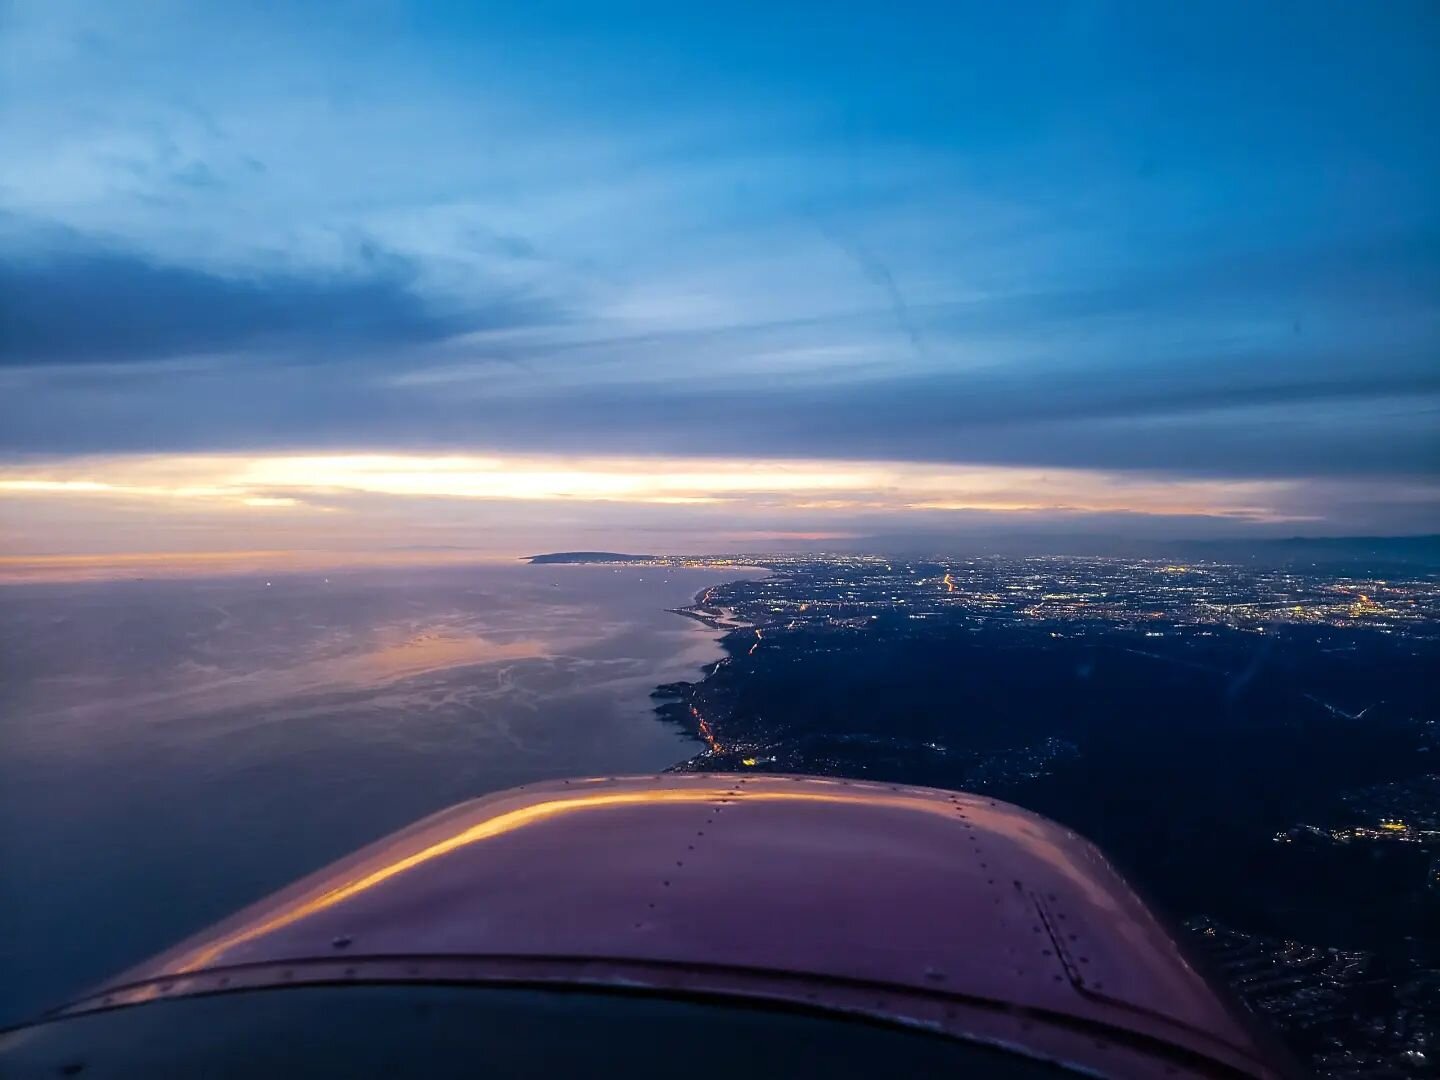 Yesterday view of the Coast line during sunset was amazing, flying at 6000 Enroute to CMA. 🛫

#californiaaviationservices #nightflight #flightschool #learntofly #asel #ppl #overtheocean #enroute #crosscountry #cessna172 #cessna #cessna150 #cessna172